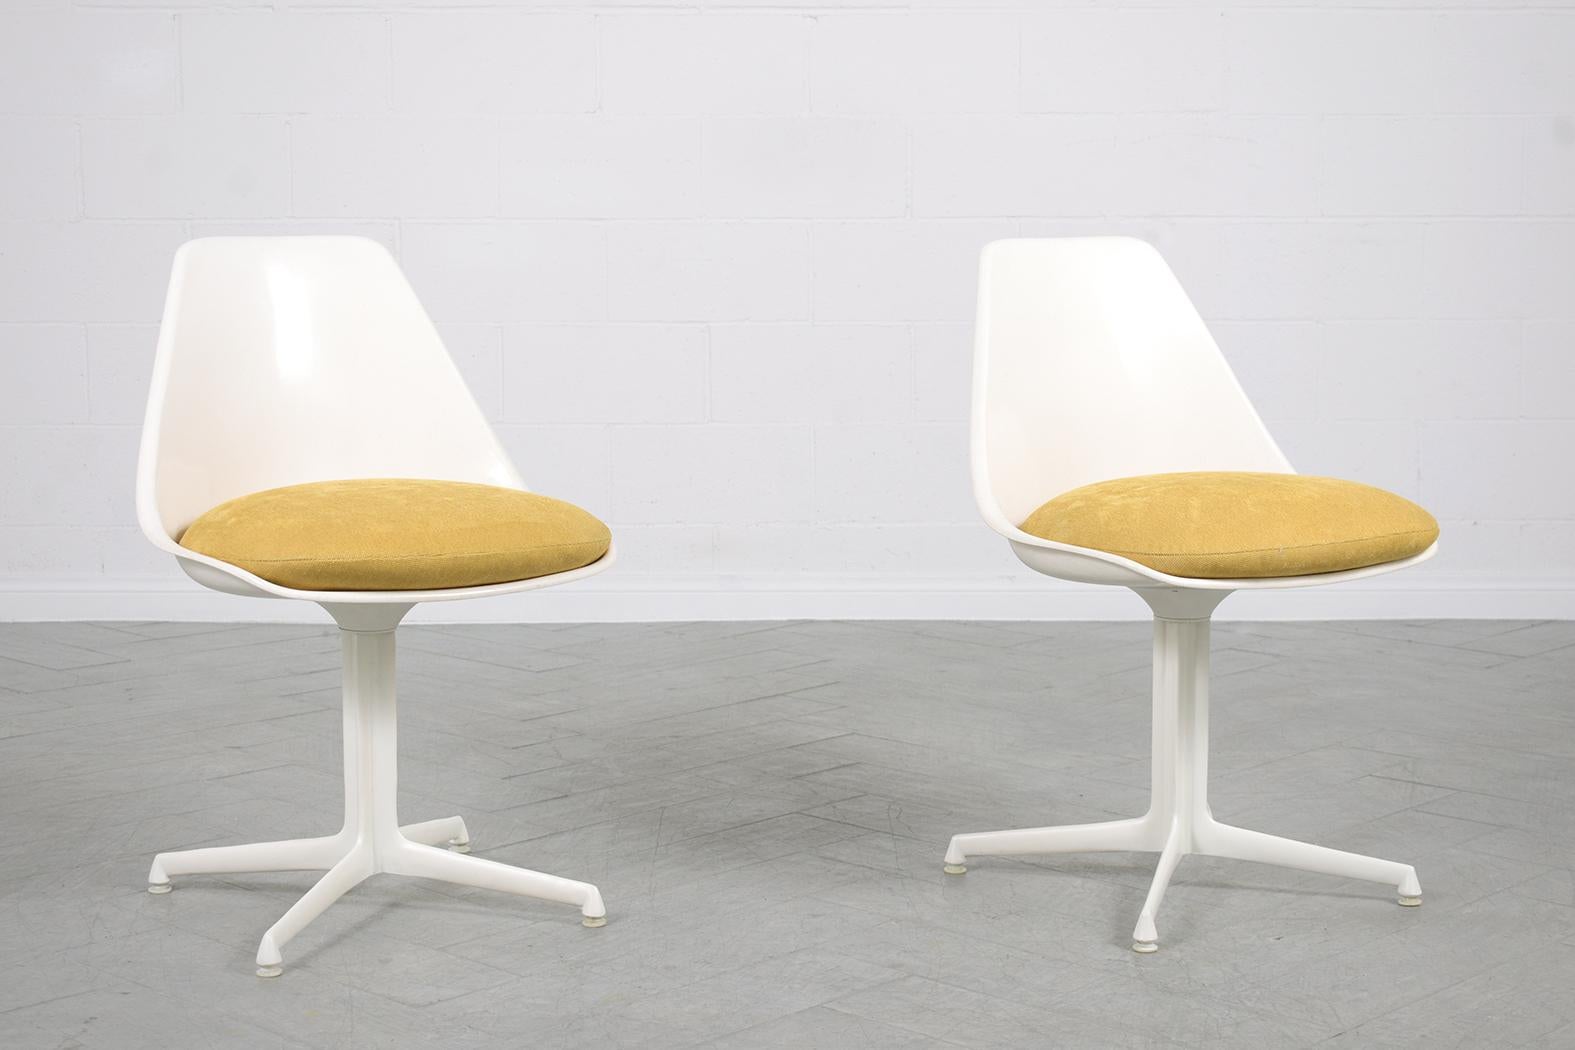 Appliqué Stunning Set of Four 1970s Mid-Century Modern Dining Chairs